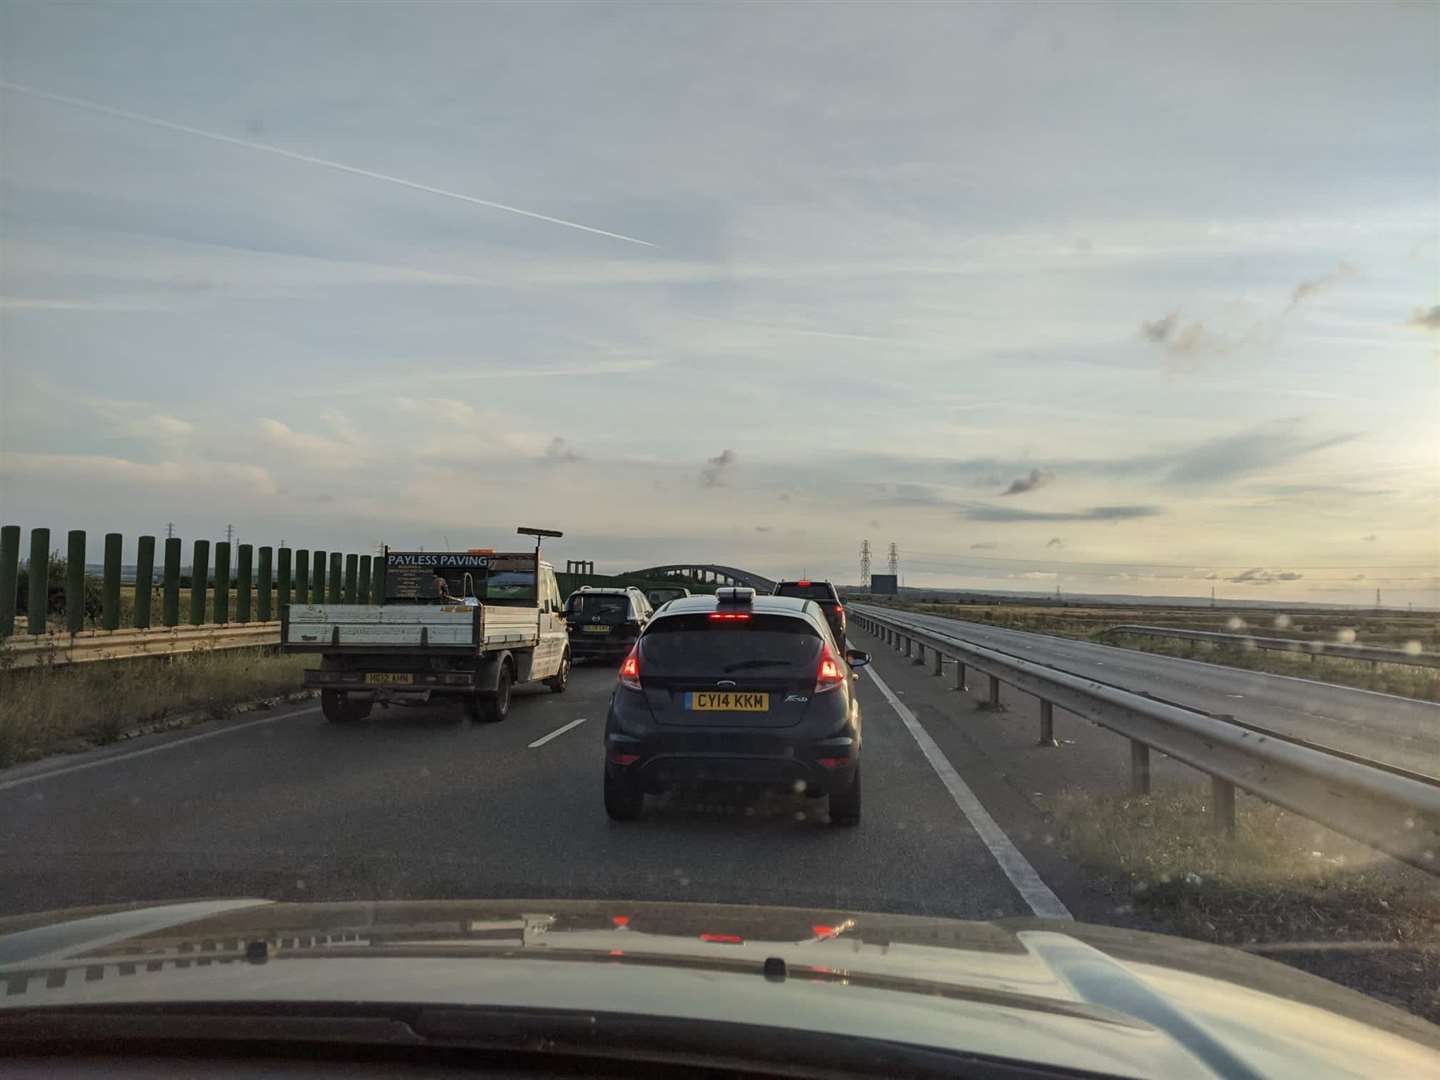 Traffic is at a standstill on the Sheppey Bridge